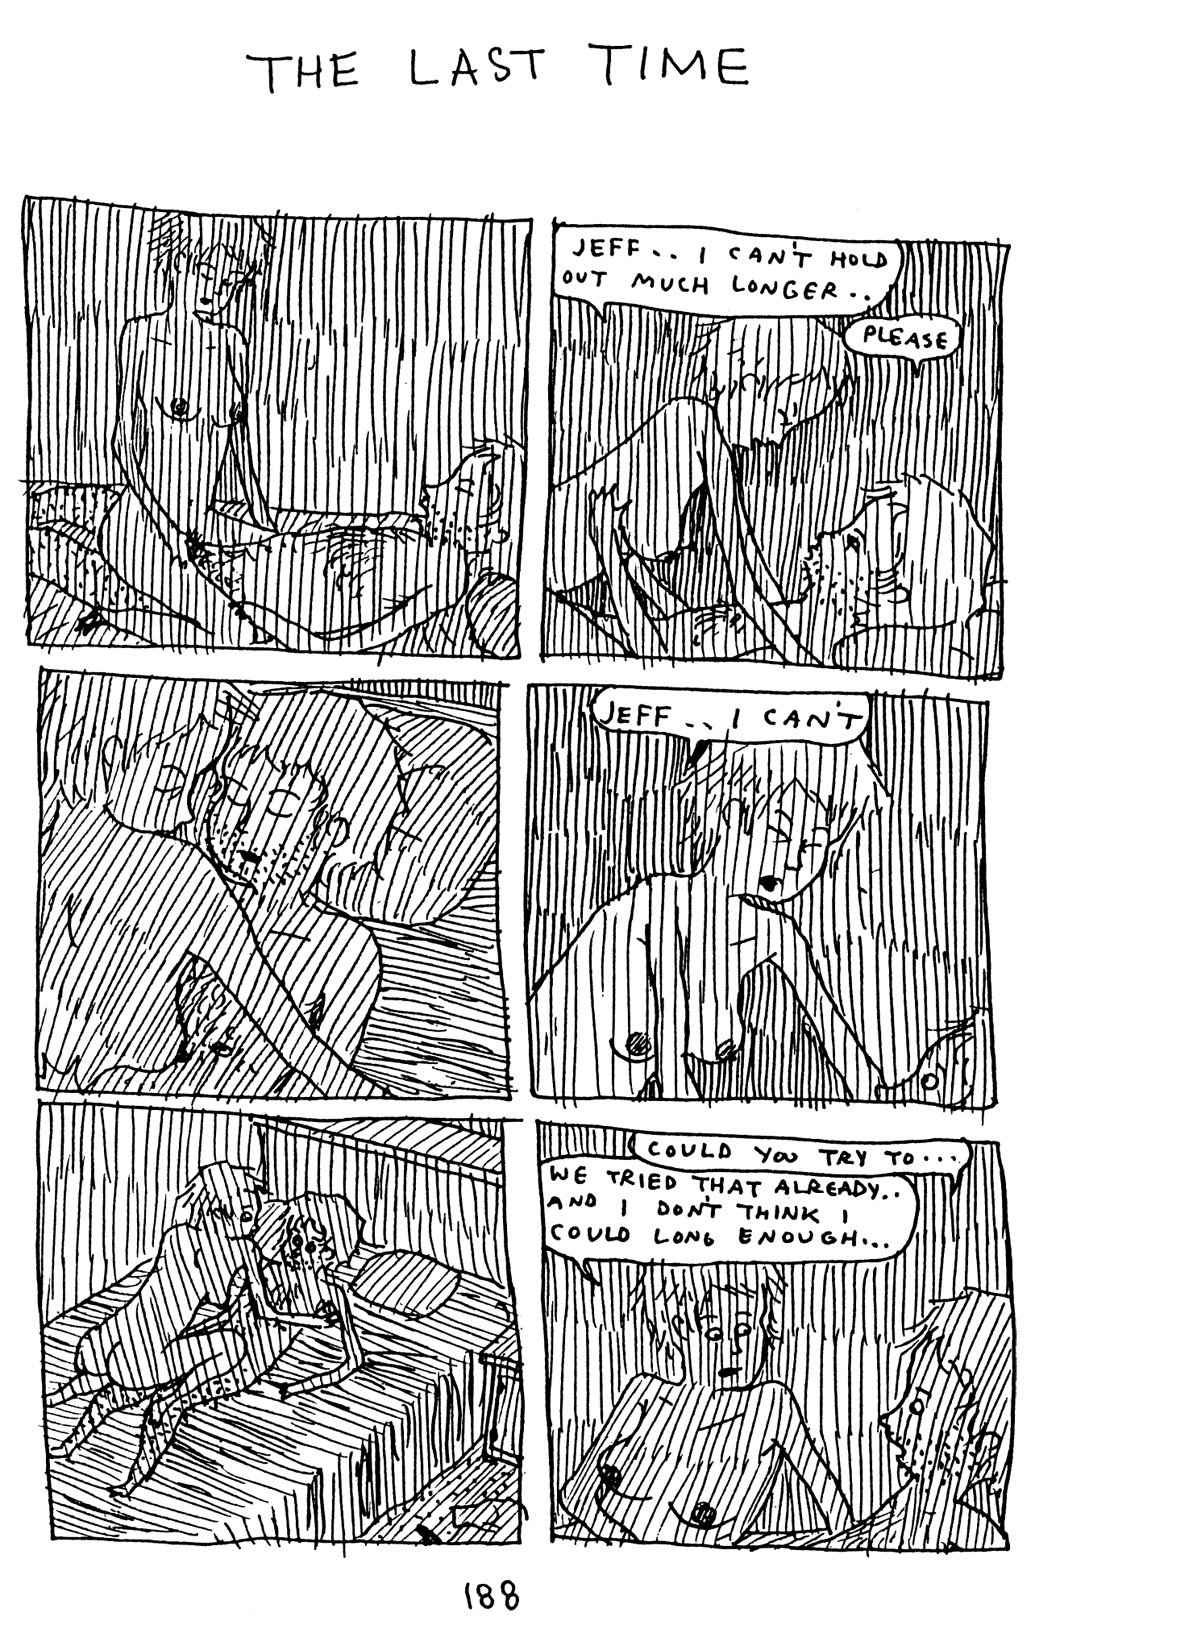 Read online Unlikely comic -  Issue # TPB (Part 3) - 3